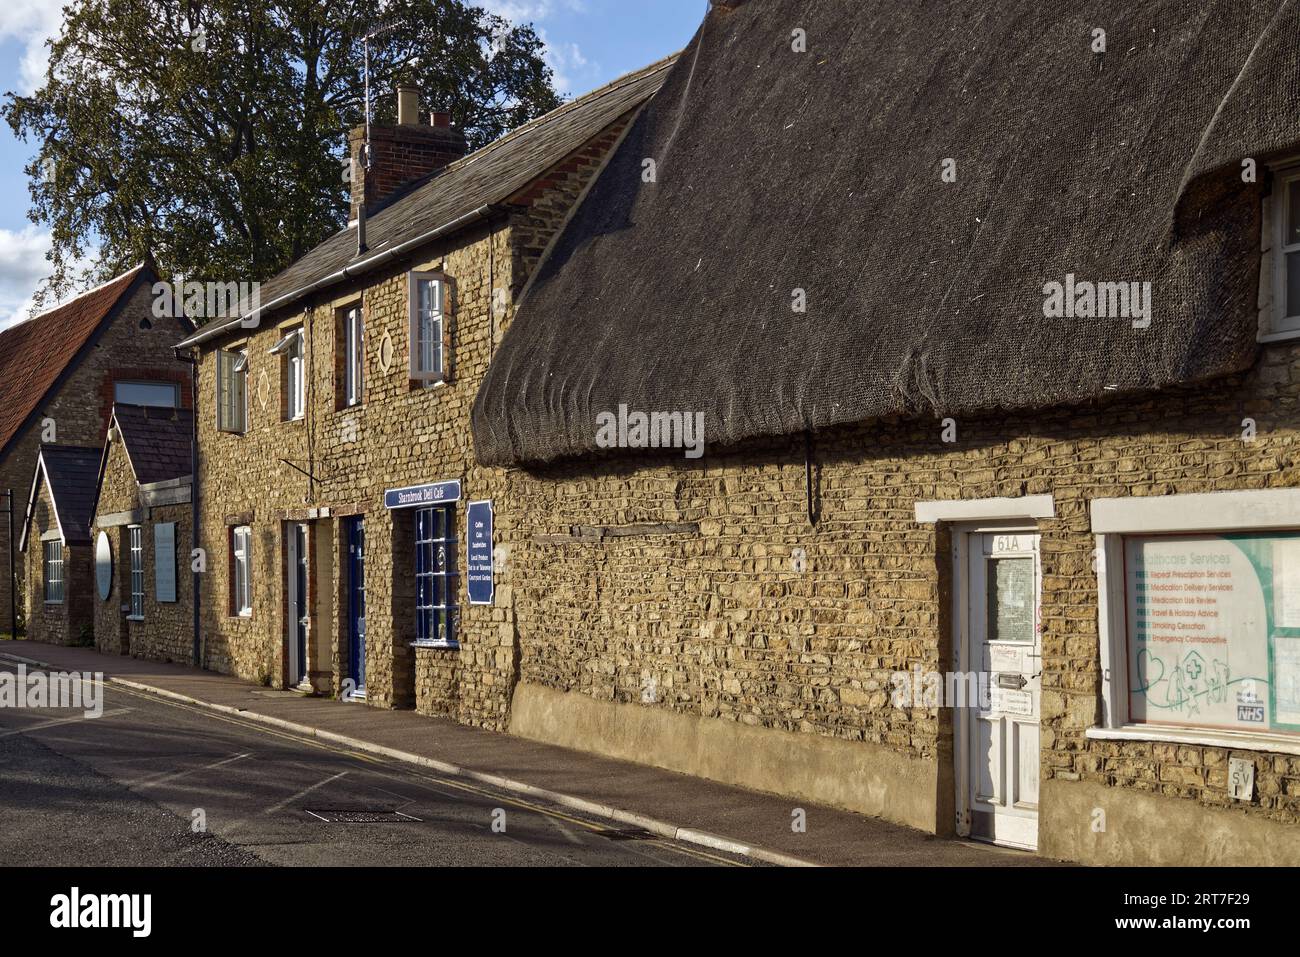 Deli cafe and thatched chemist shop in the High Street of the Bedfordshire village of Sharnbrook, England, UK Stock Photo